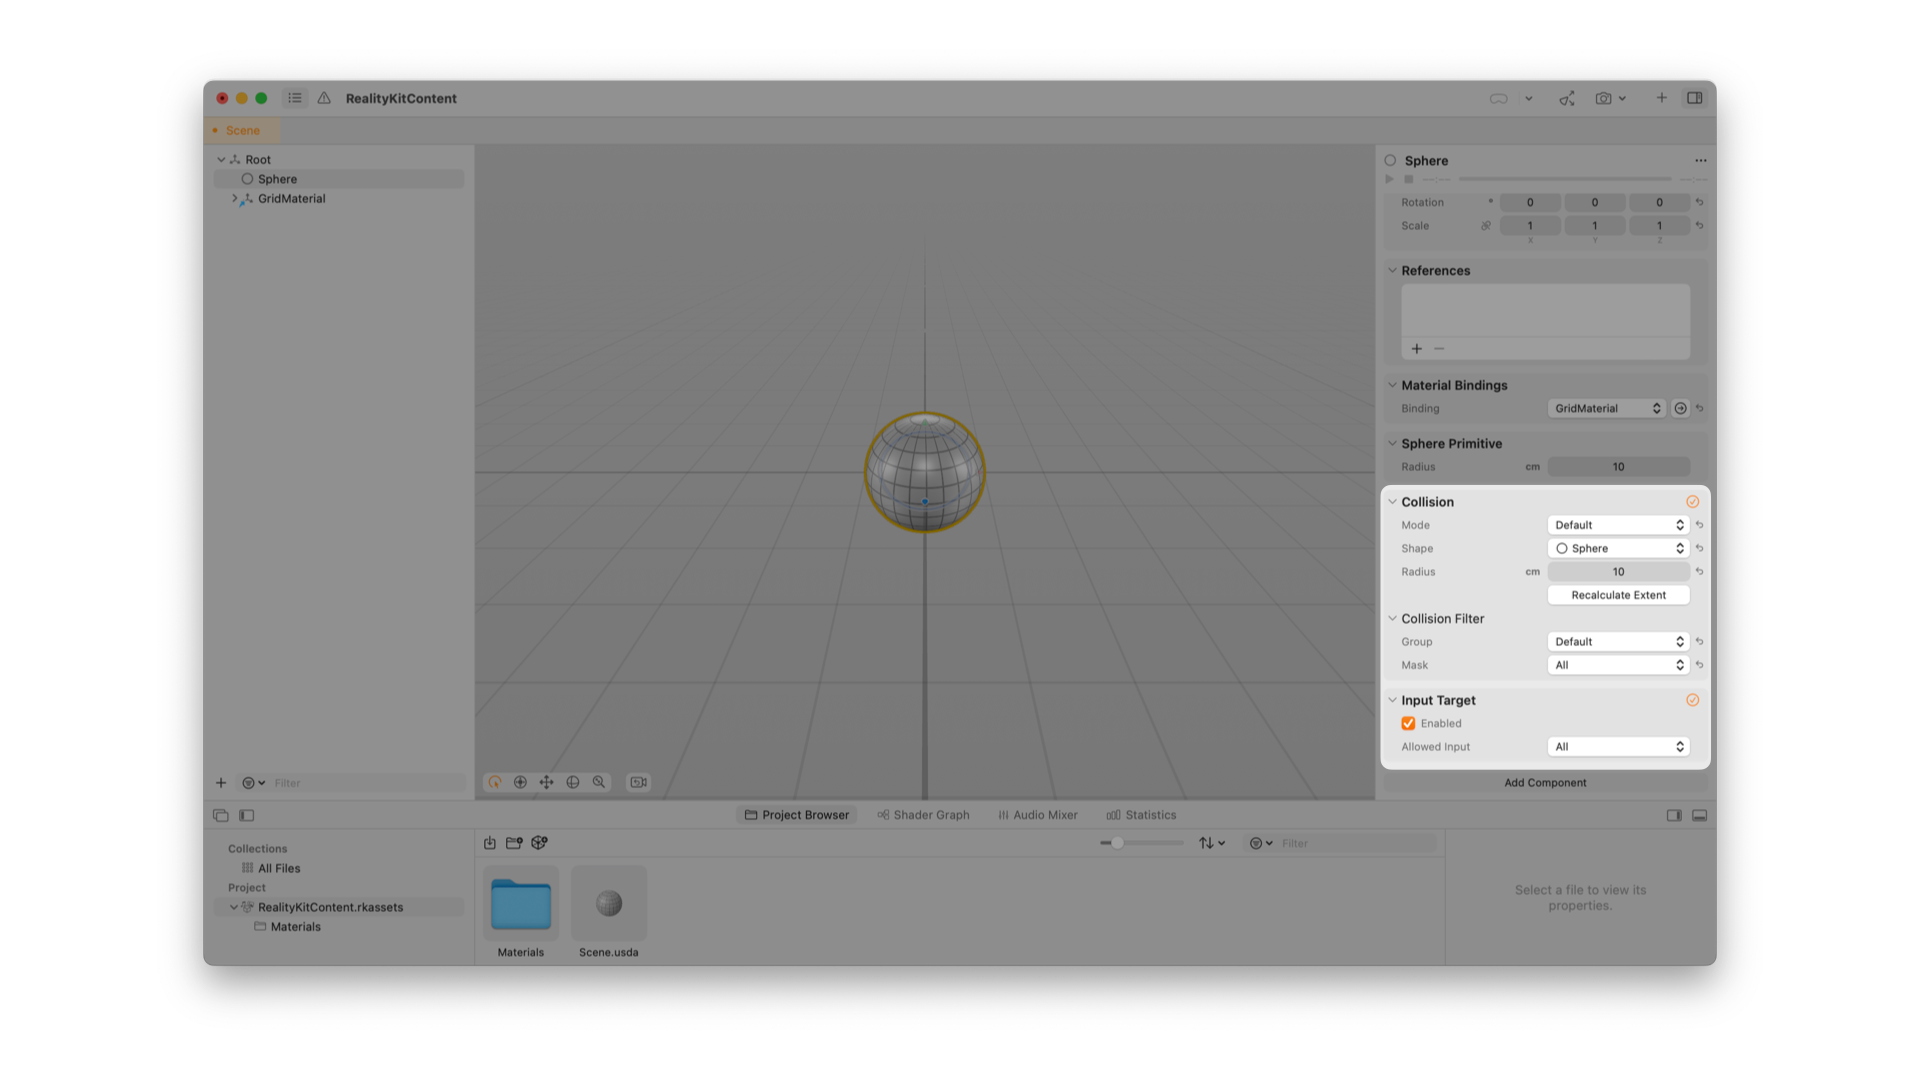 A screenshot of Reality Composer Pro showing the properties of a 3D sphere object. Various settings for the sphere are displayed, including rotation, scale, material bindings, sphere primitive properties, collision settings, collision filter, and input target options.